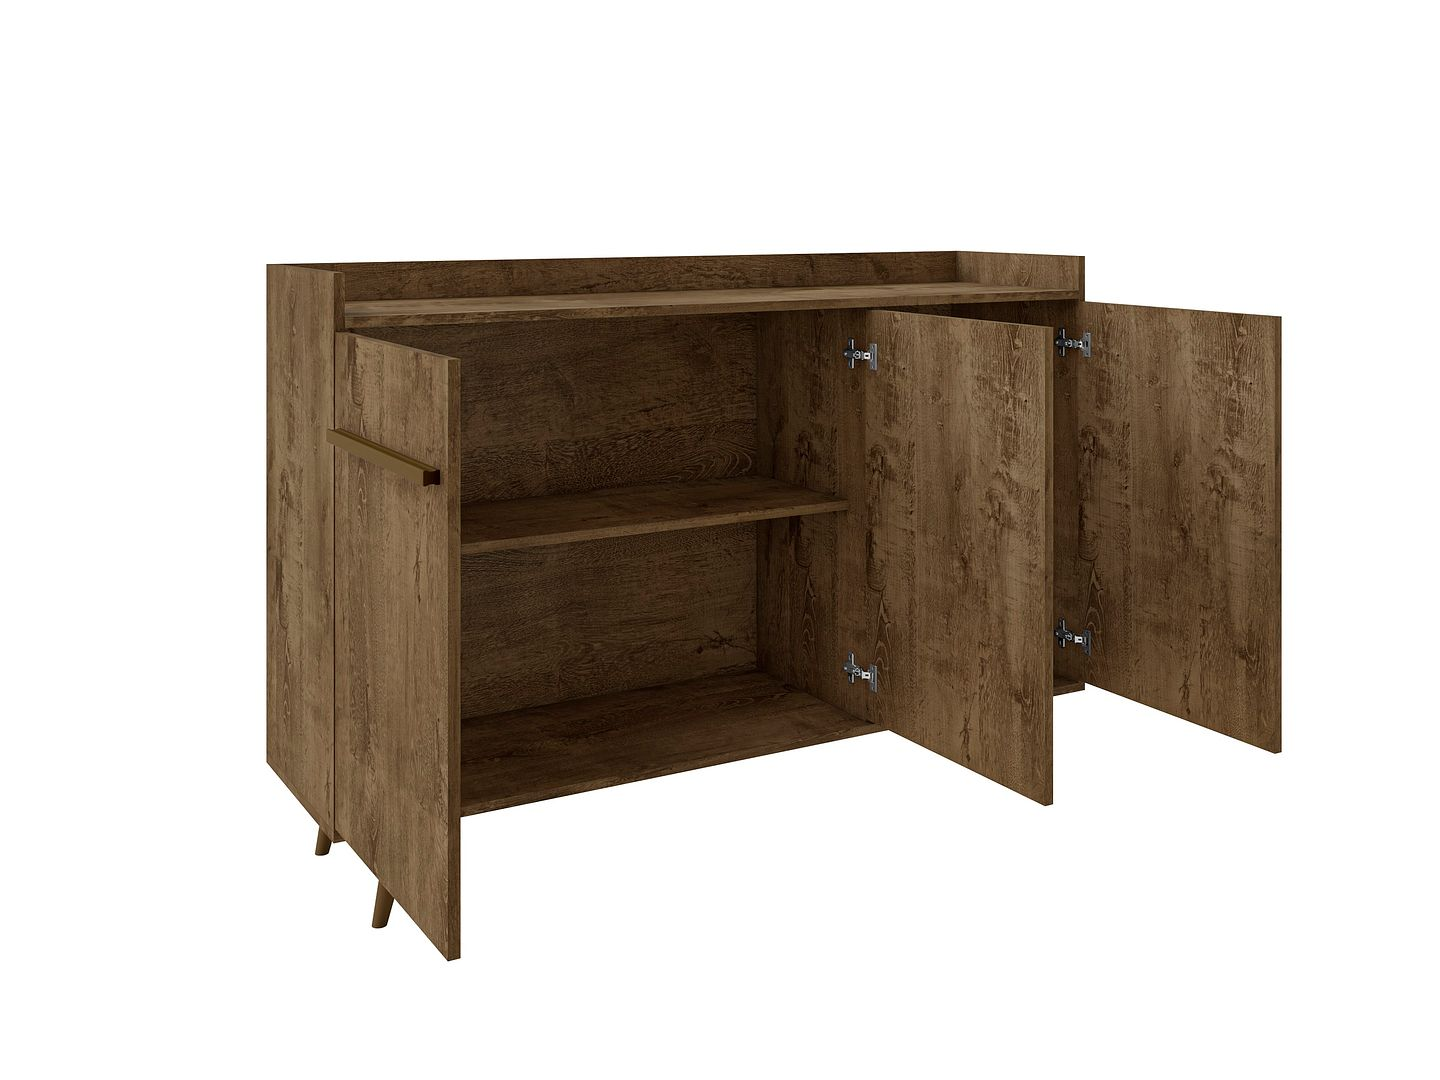 Bradley 53.54 Buffet Stand with 4 Shelves in Rustic Brown